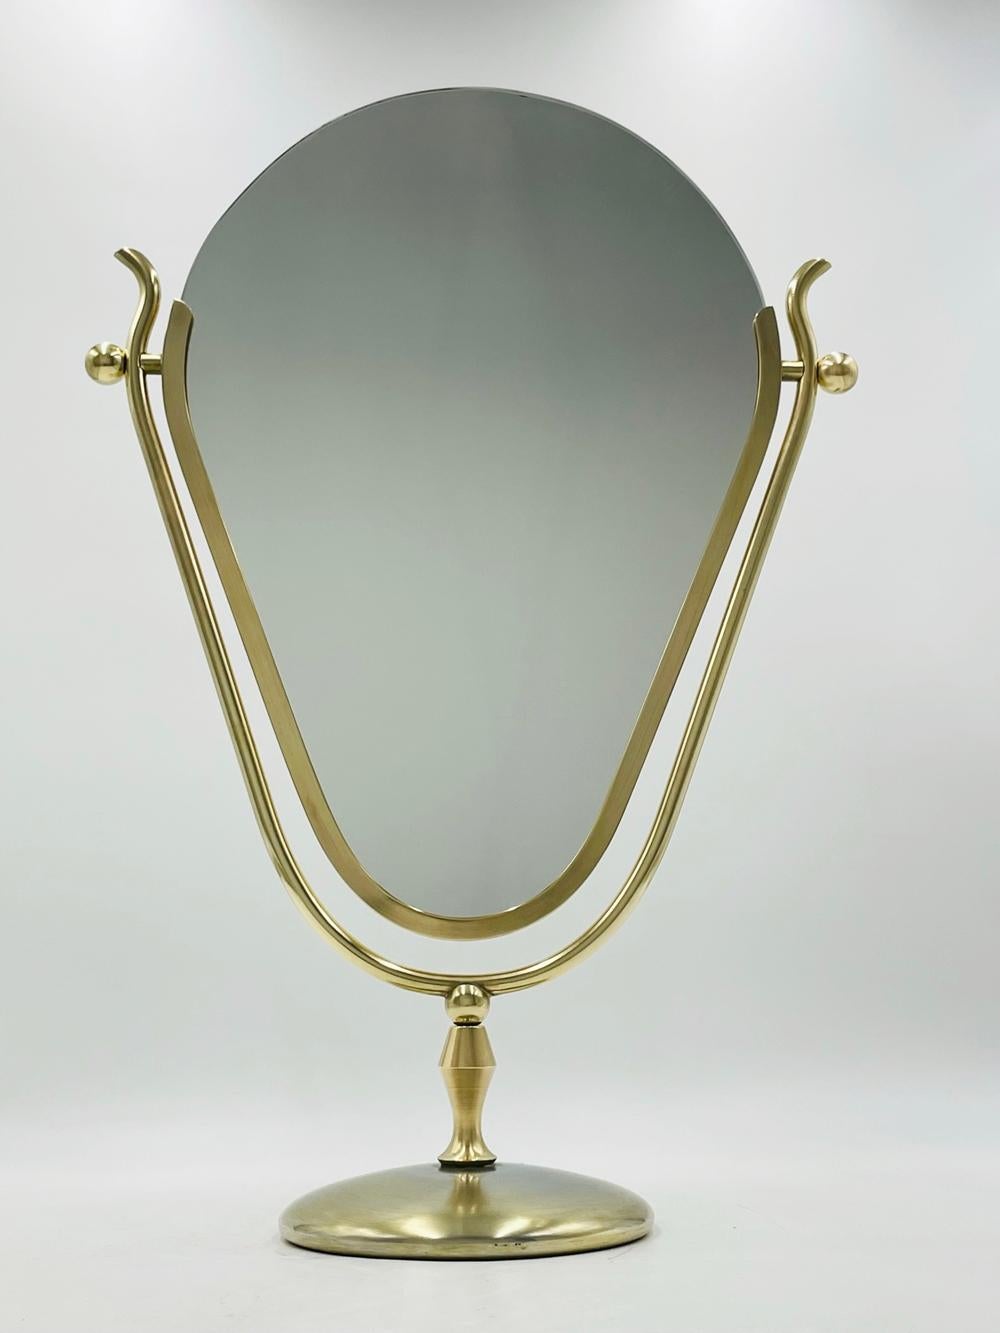 Charles Hollis Jones "Faces" Vanity Mirror, Signed and Dated